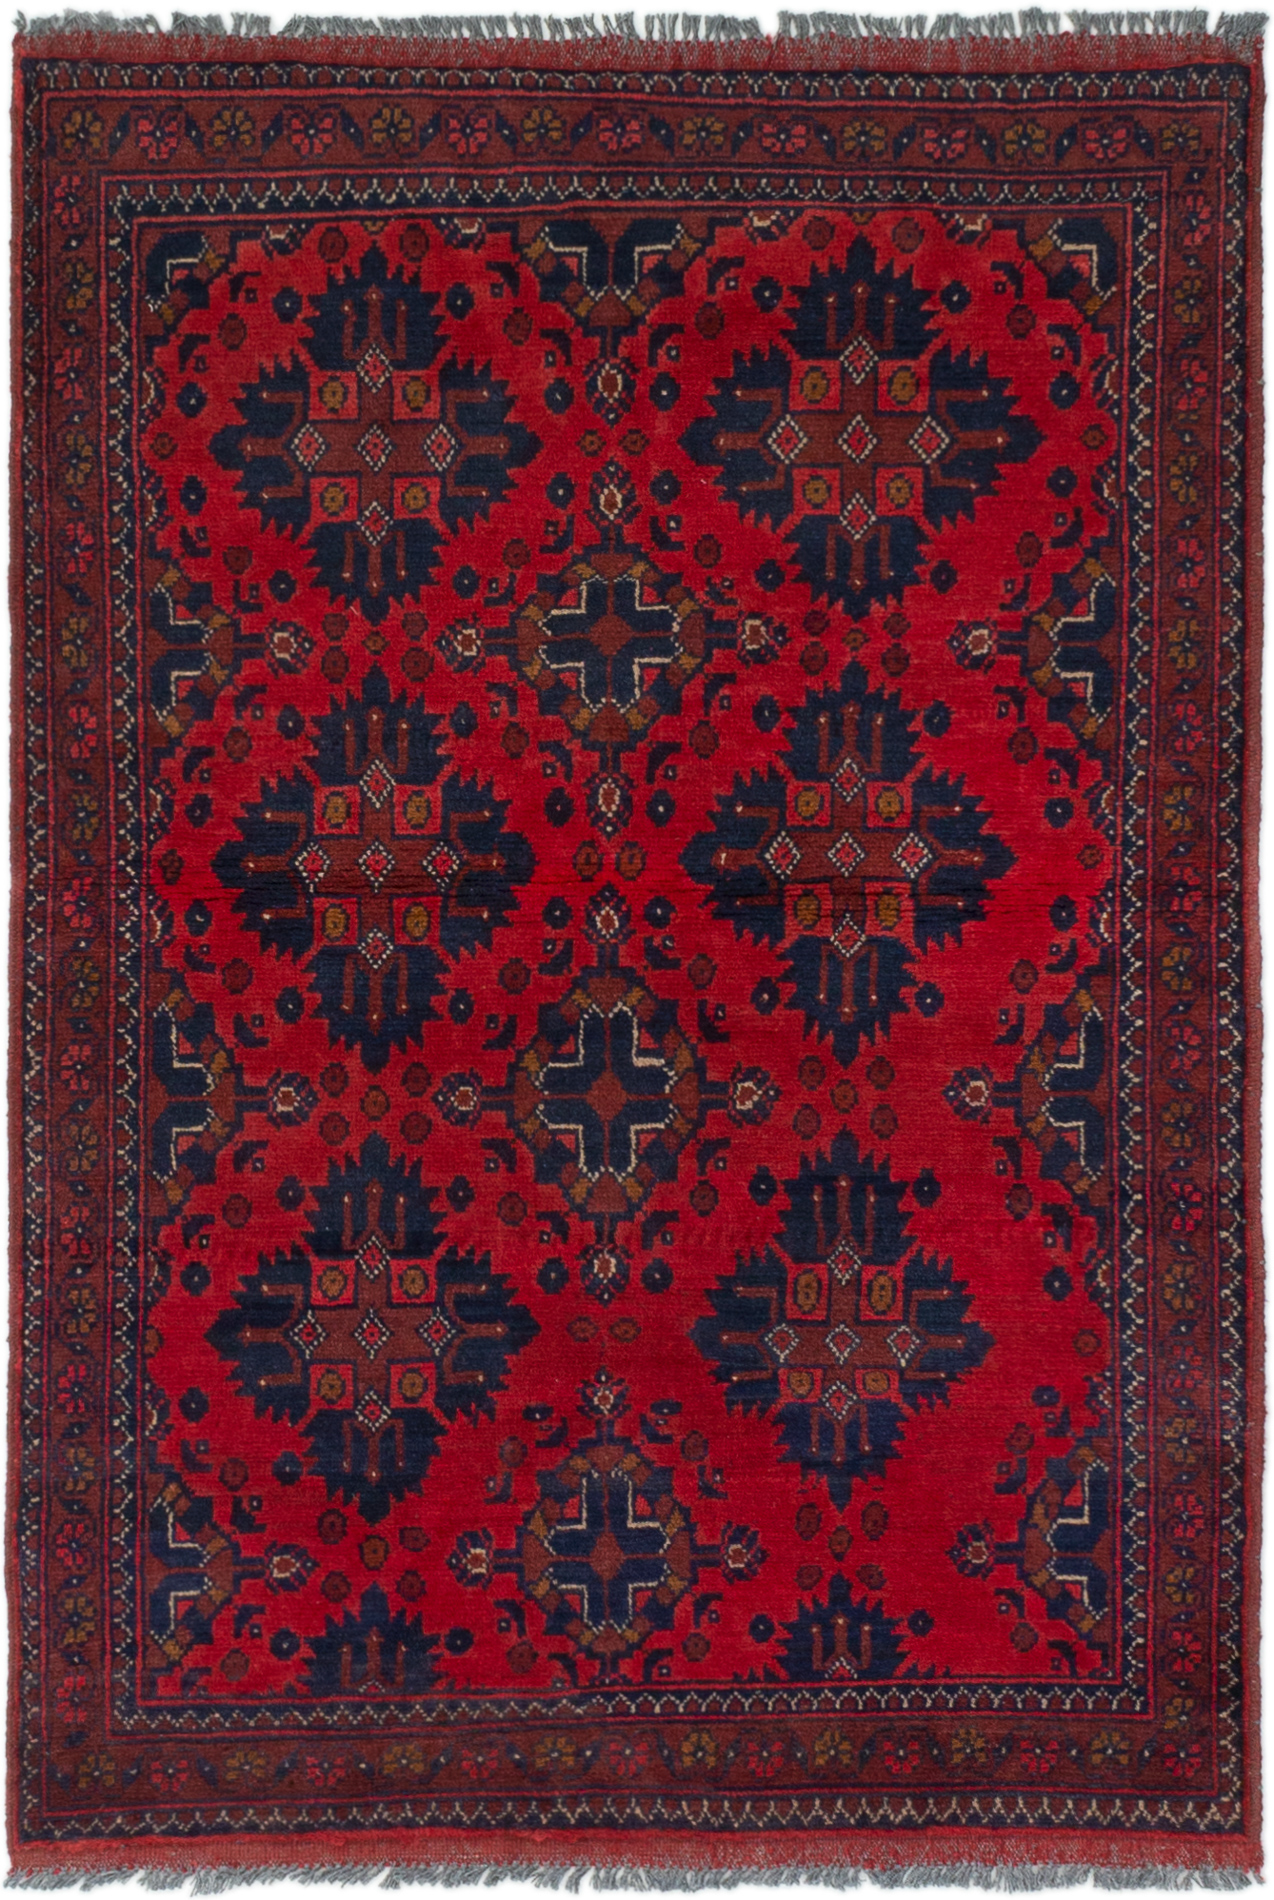 Hand-knotted Finest Khal Mohammadi Red Wool Rug 3'2" x 4'9"  Size: 3'2" x 4'9"  